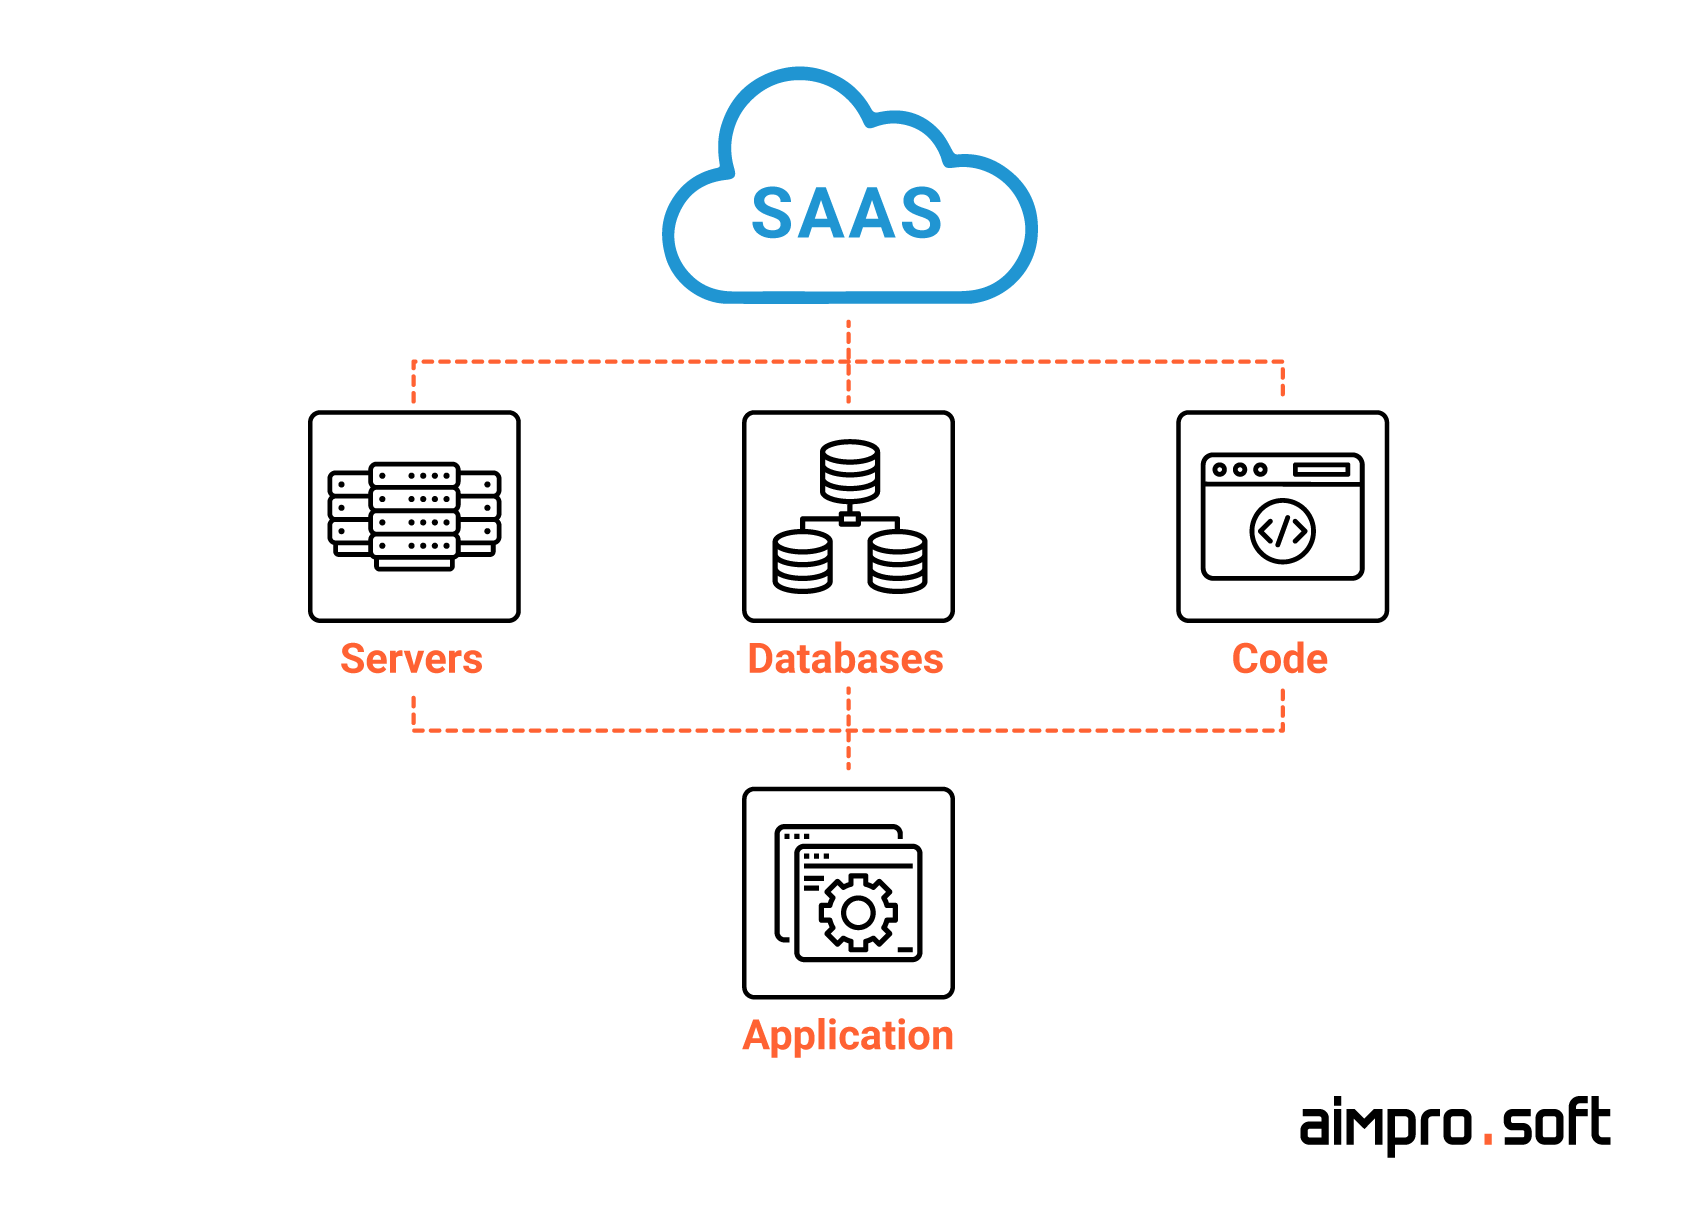 How do SaaS applications work